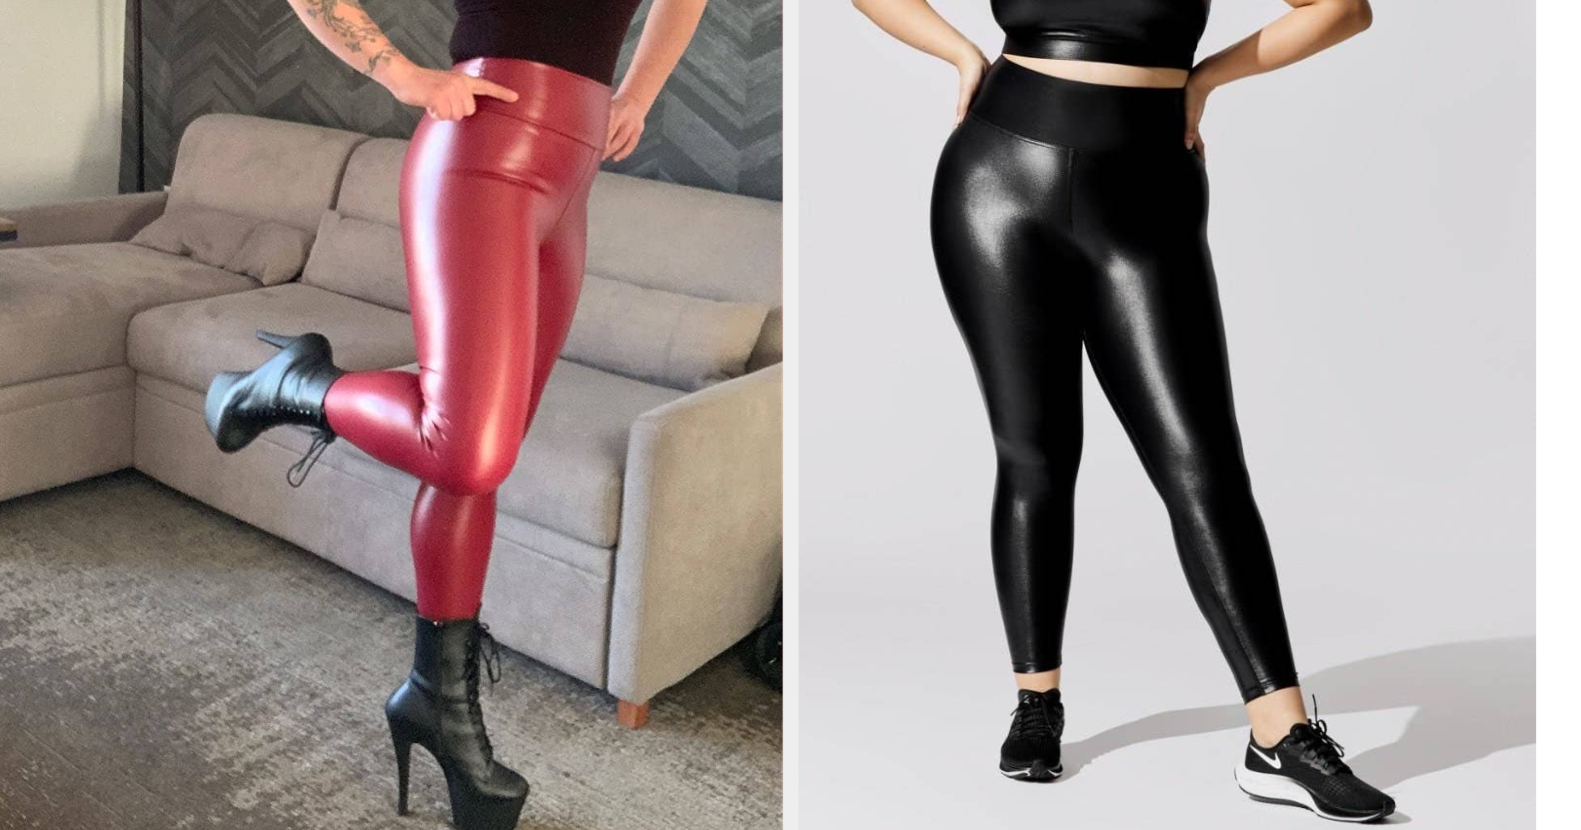 Five Fall Spanx Faux Leather Leggings Outfits - By Lauren M